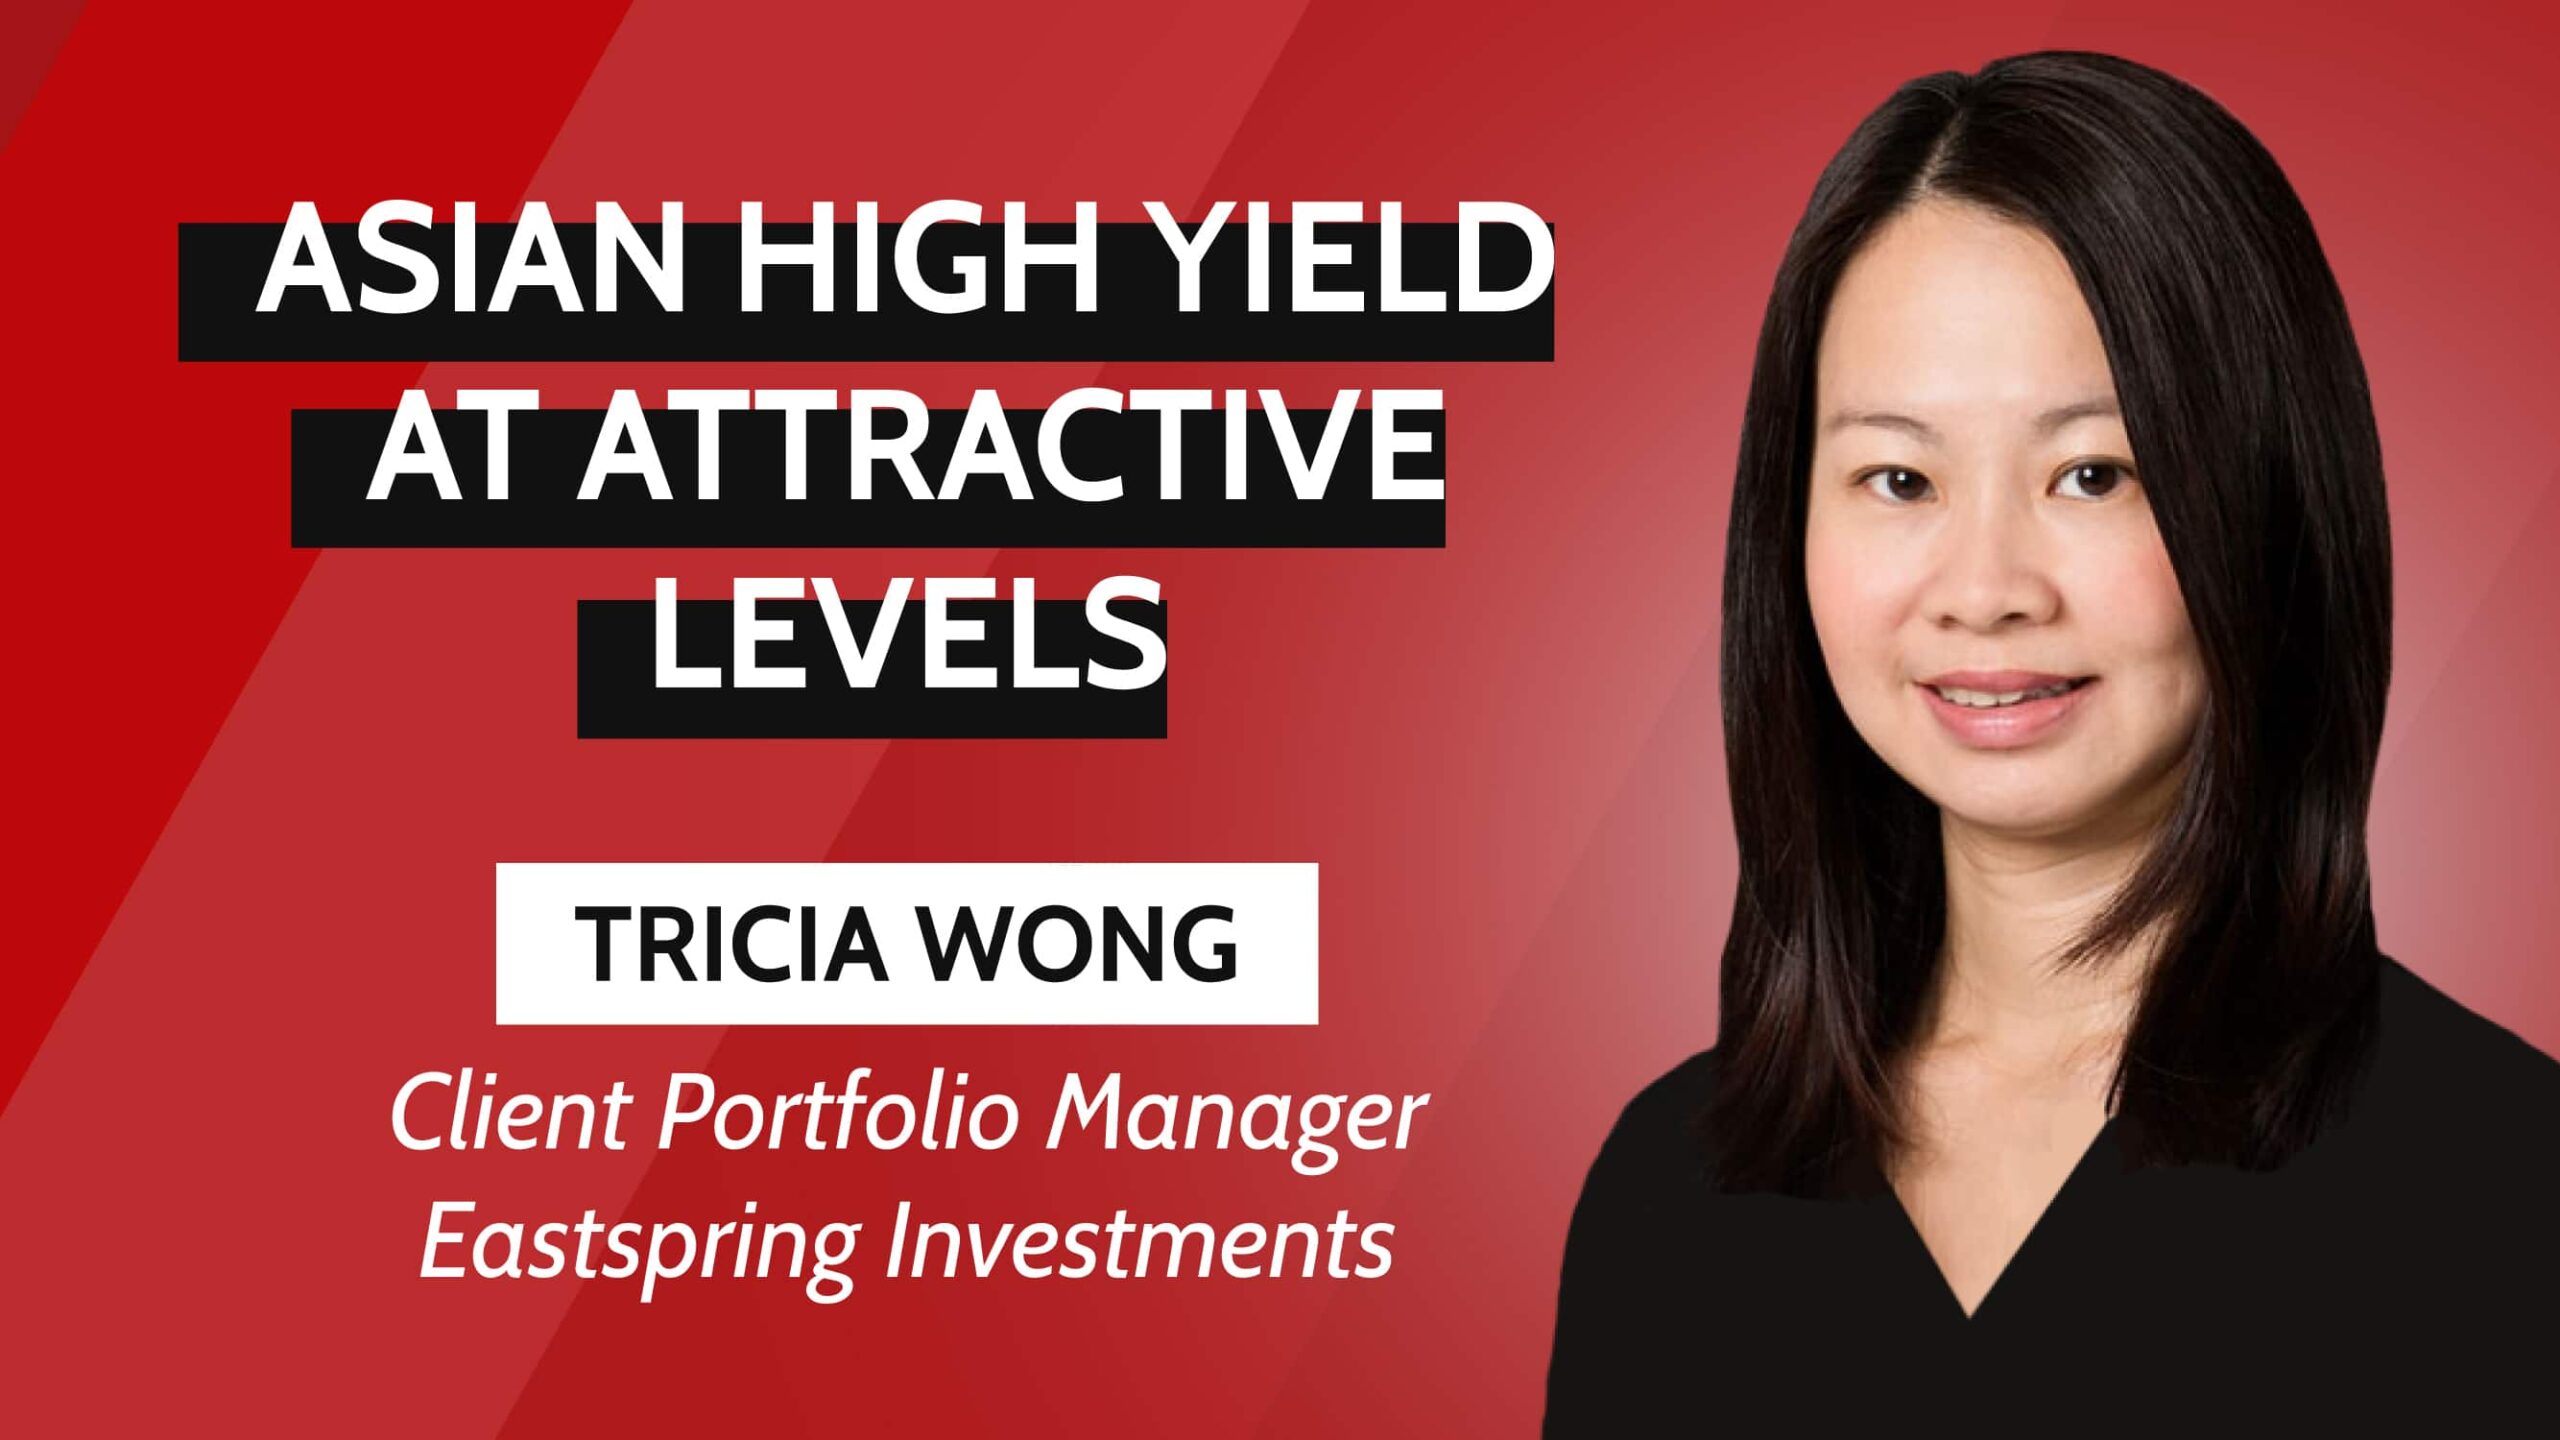 Asian High Yield with attractive valuations